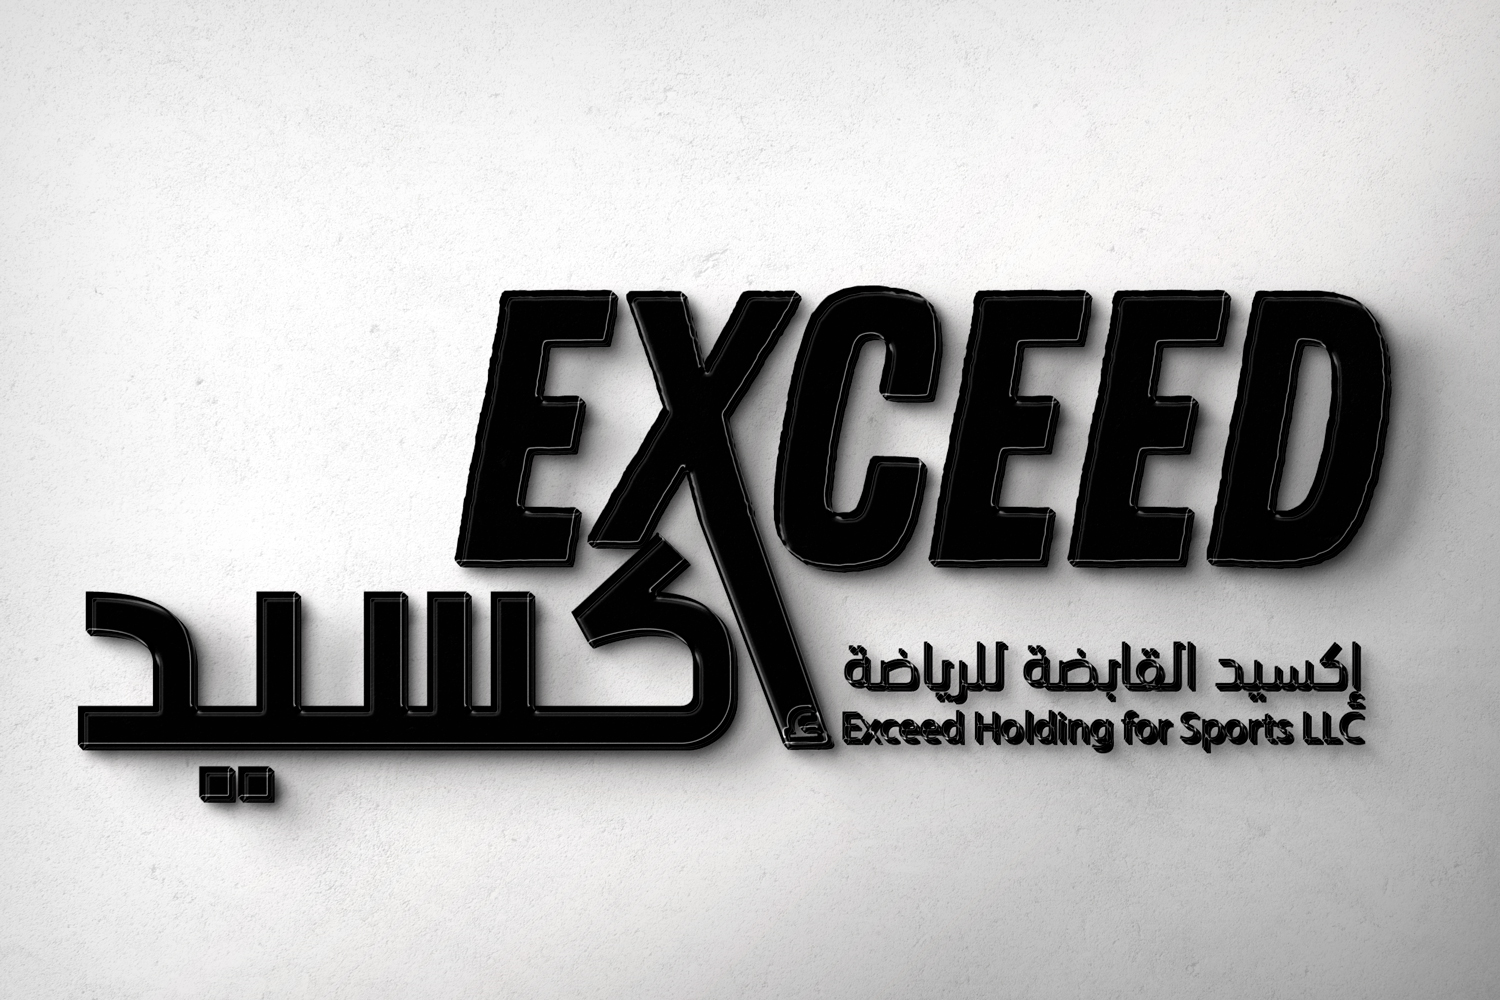 excced